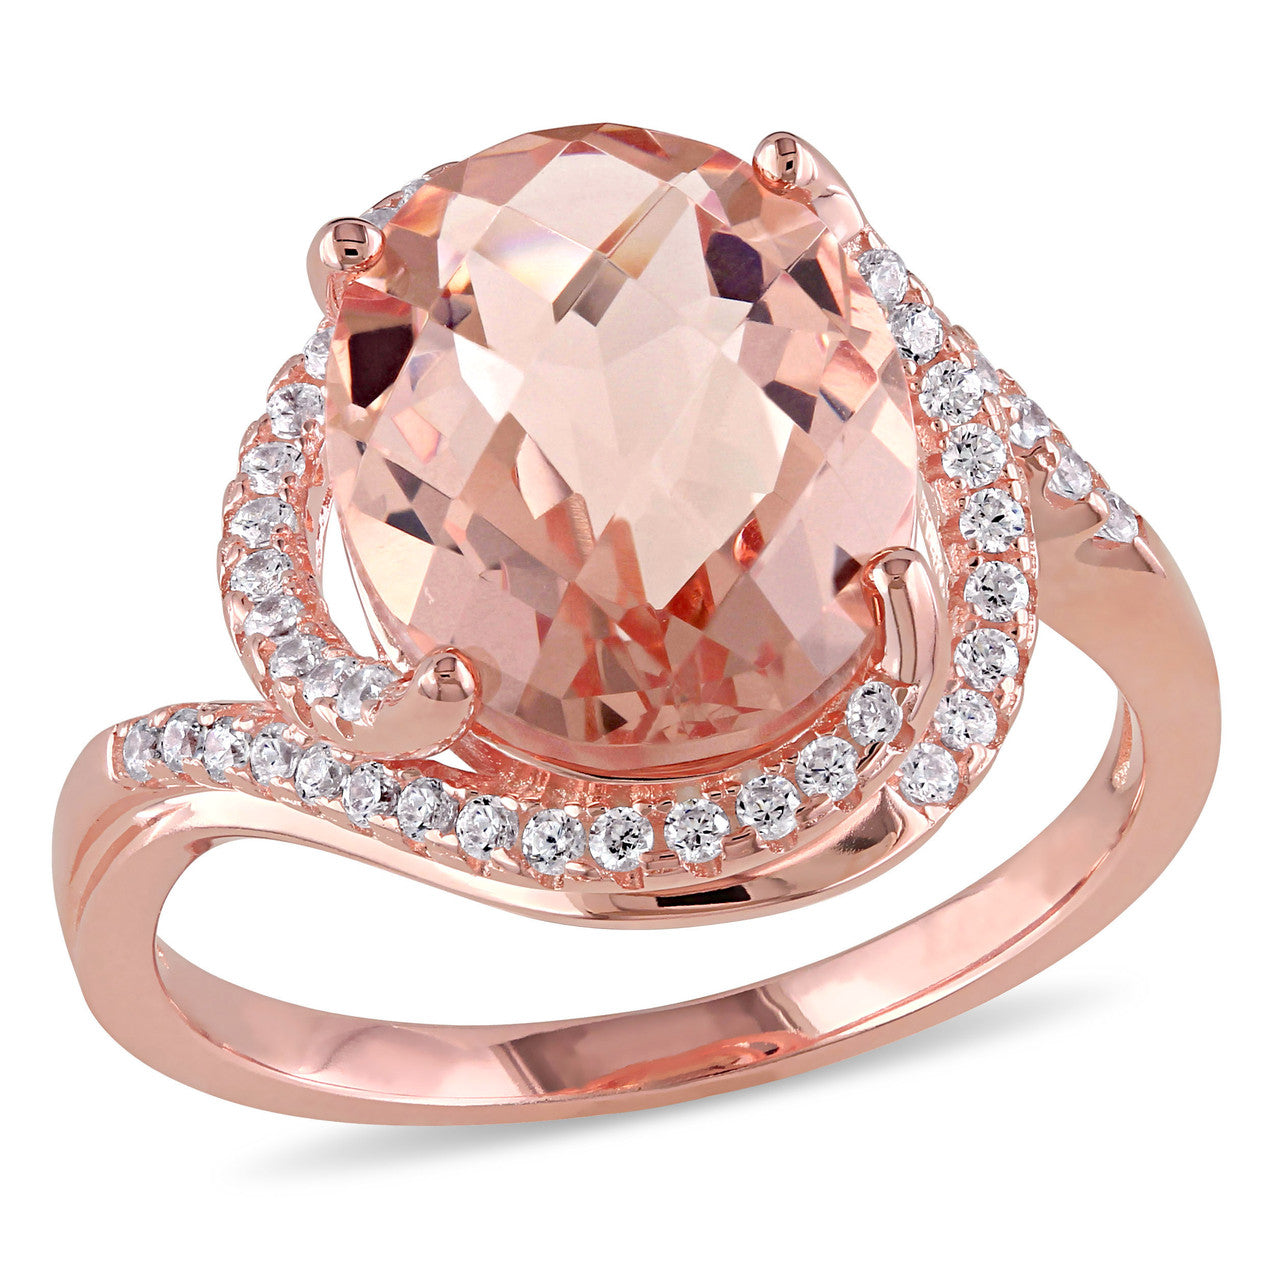 Ice Jewellery Simulated Morganite & Cubic Zirconia Oval Halo Swirl Ring In Rose Plated Sterling Silver - 75000002494 | Ice Jewellery Australia